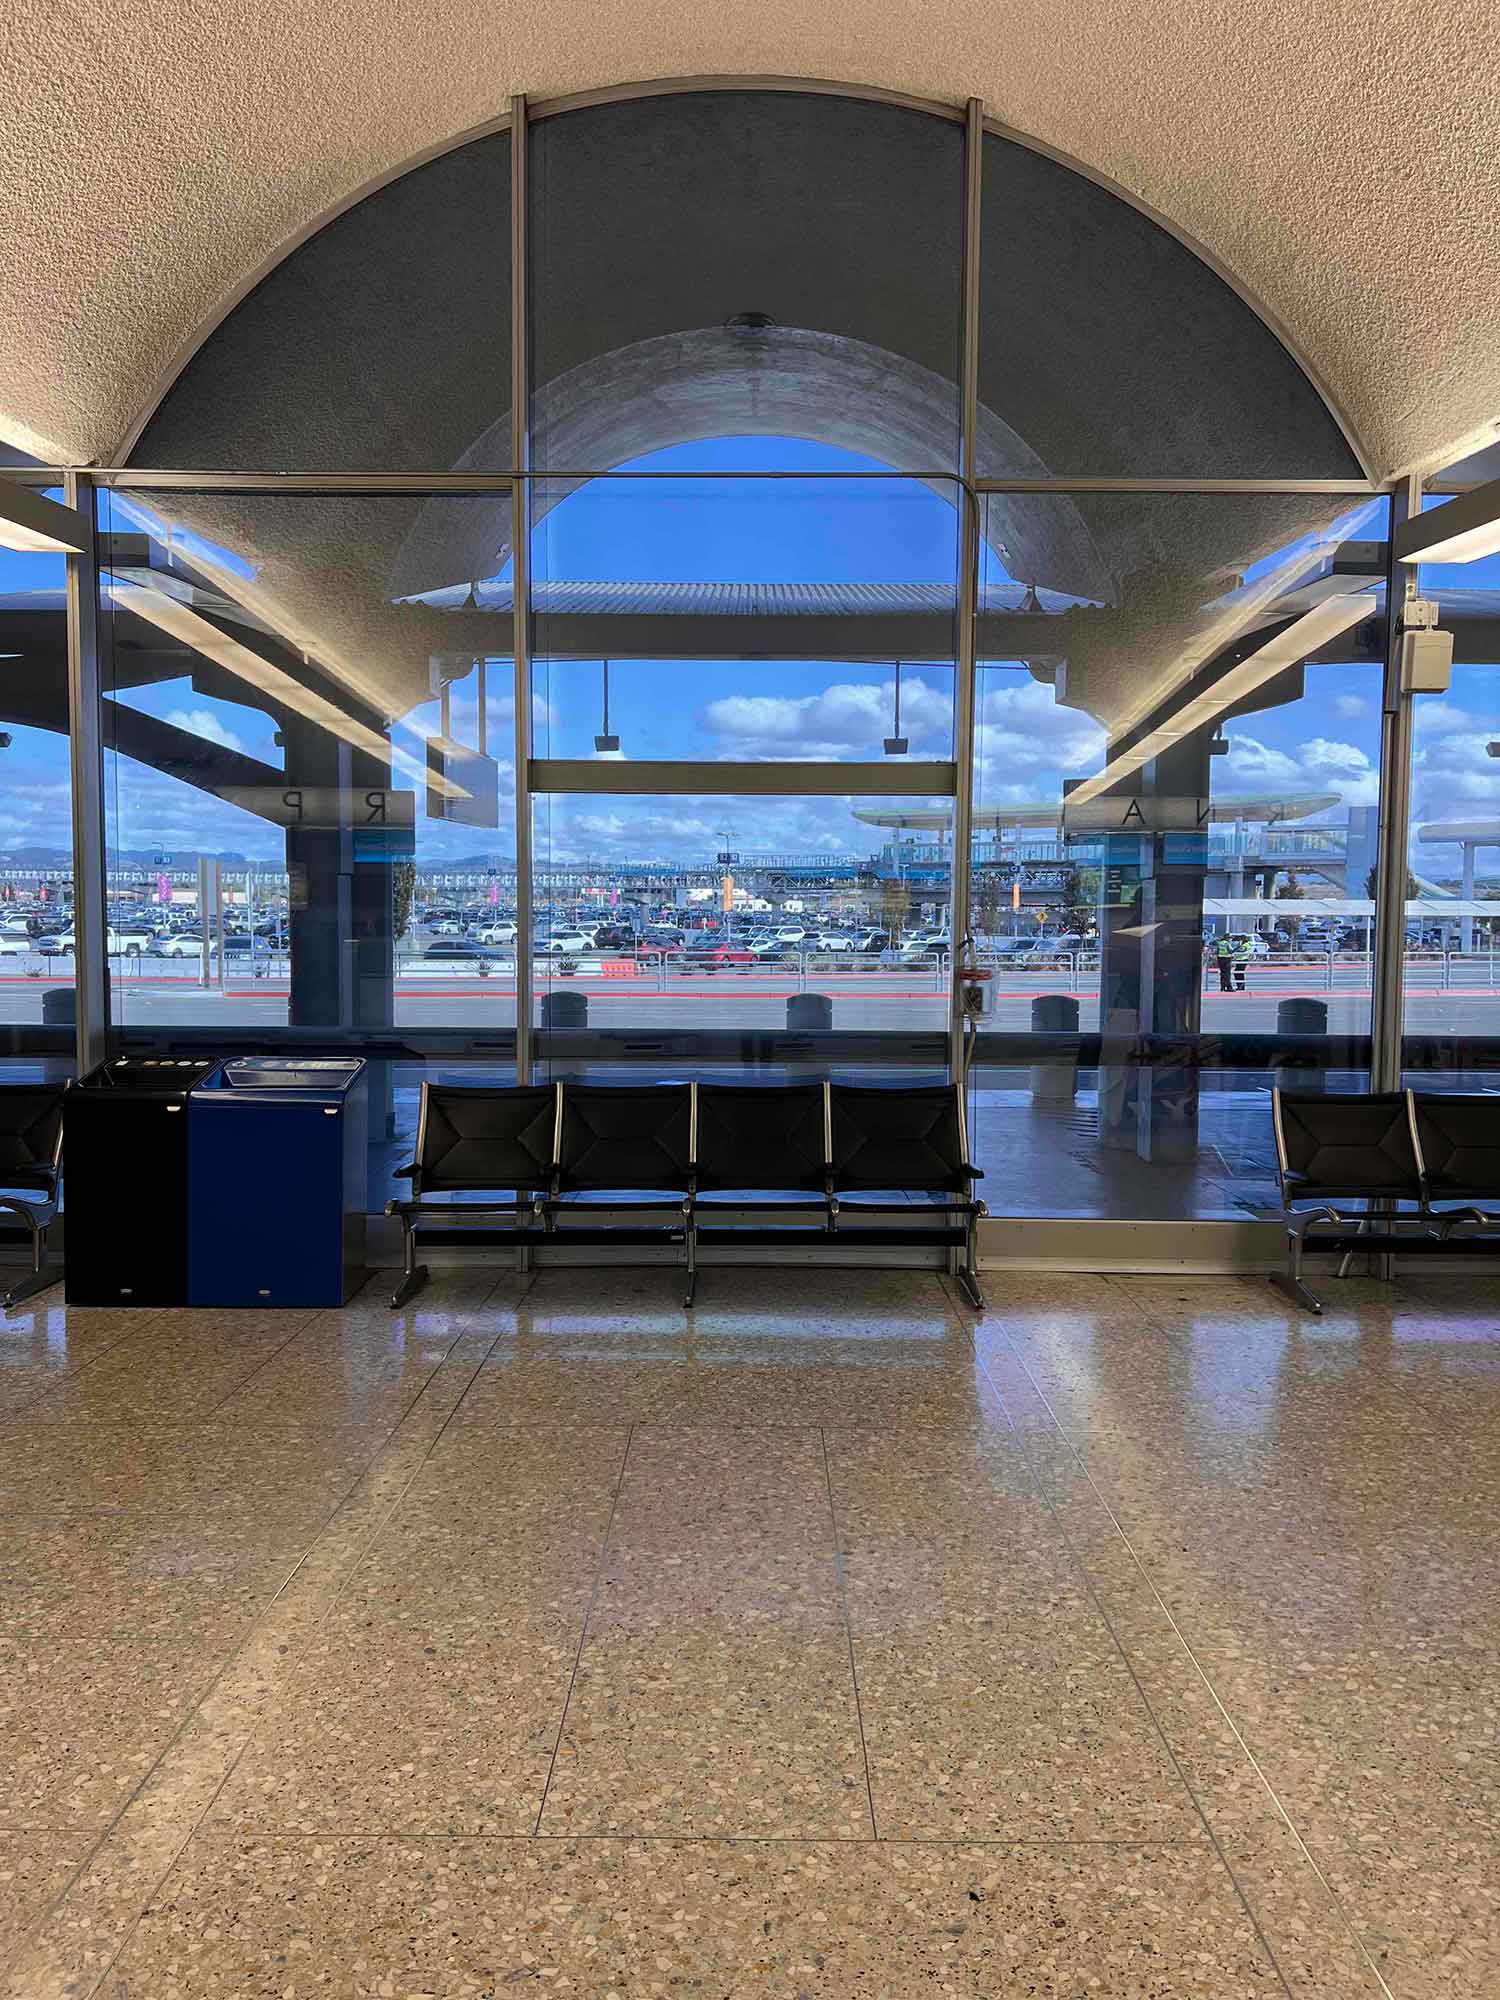 The ClimatePro team installed 3M Affinity Window Film at Oakland International Airport.